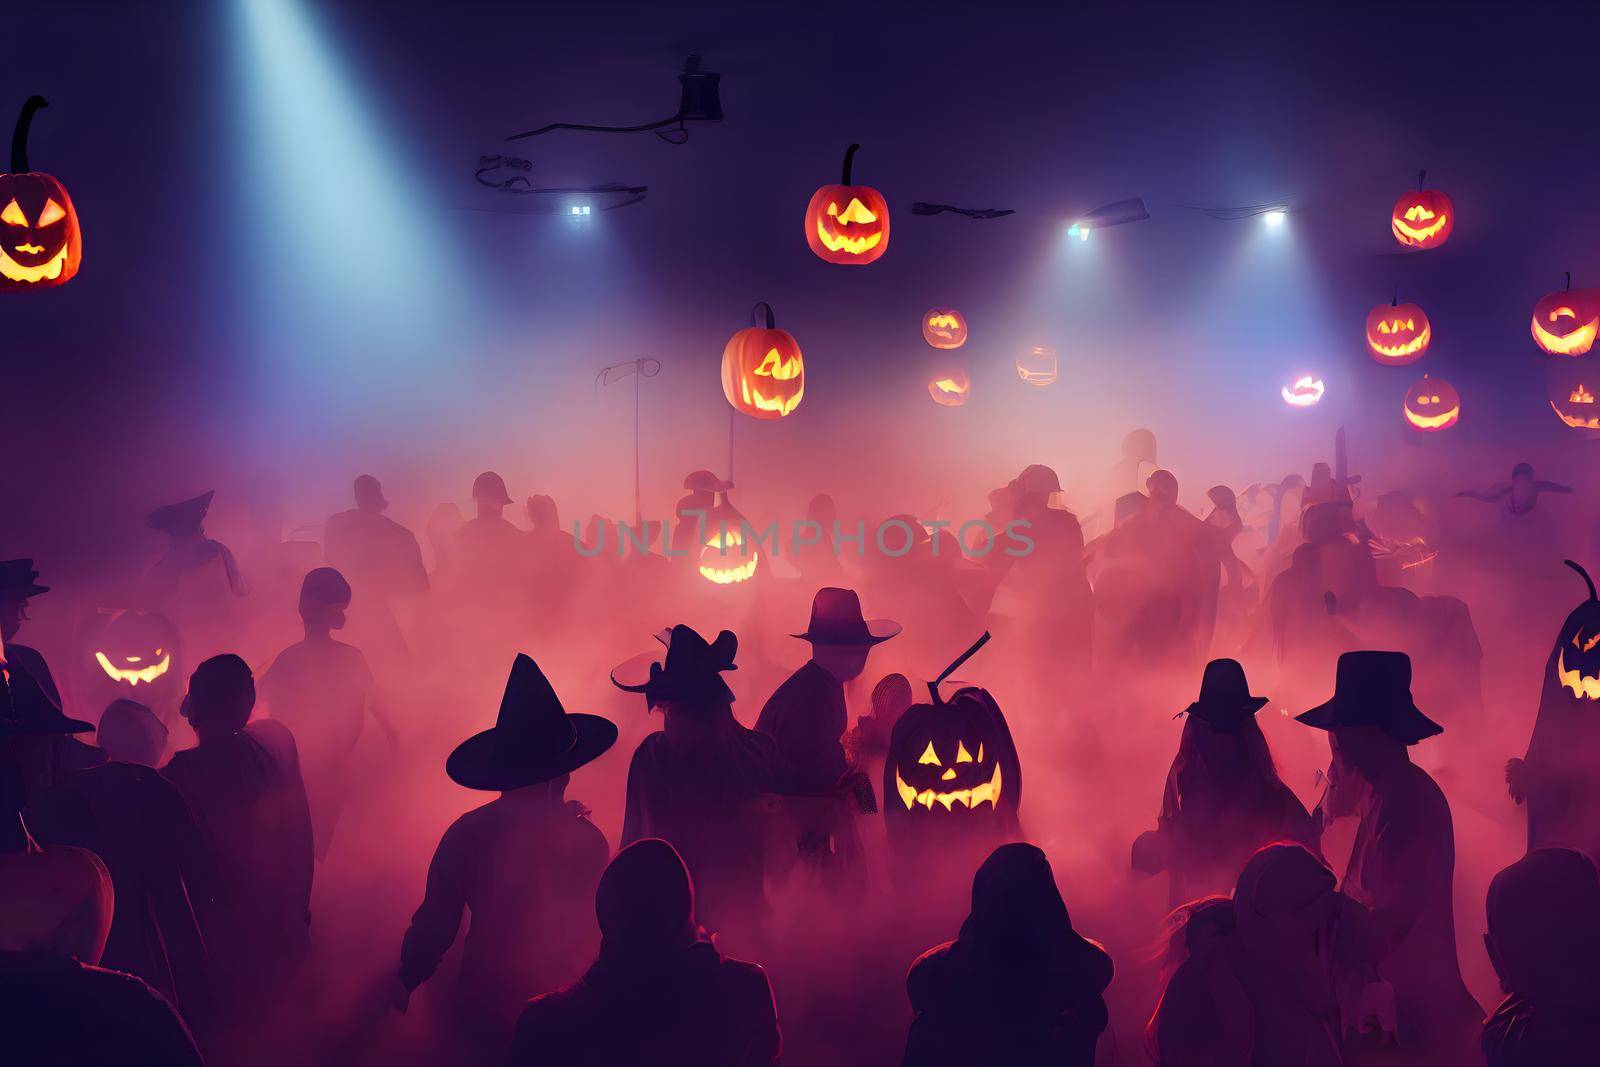 massive halloween party with many unrecognizable costumed people dancing in foggy environment, neural network generated image. by z1b